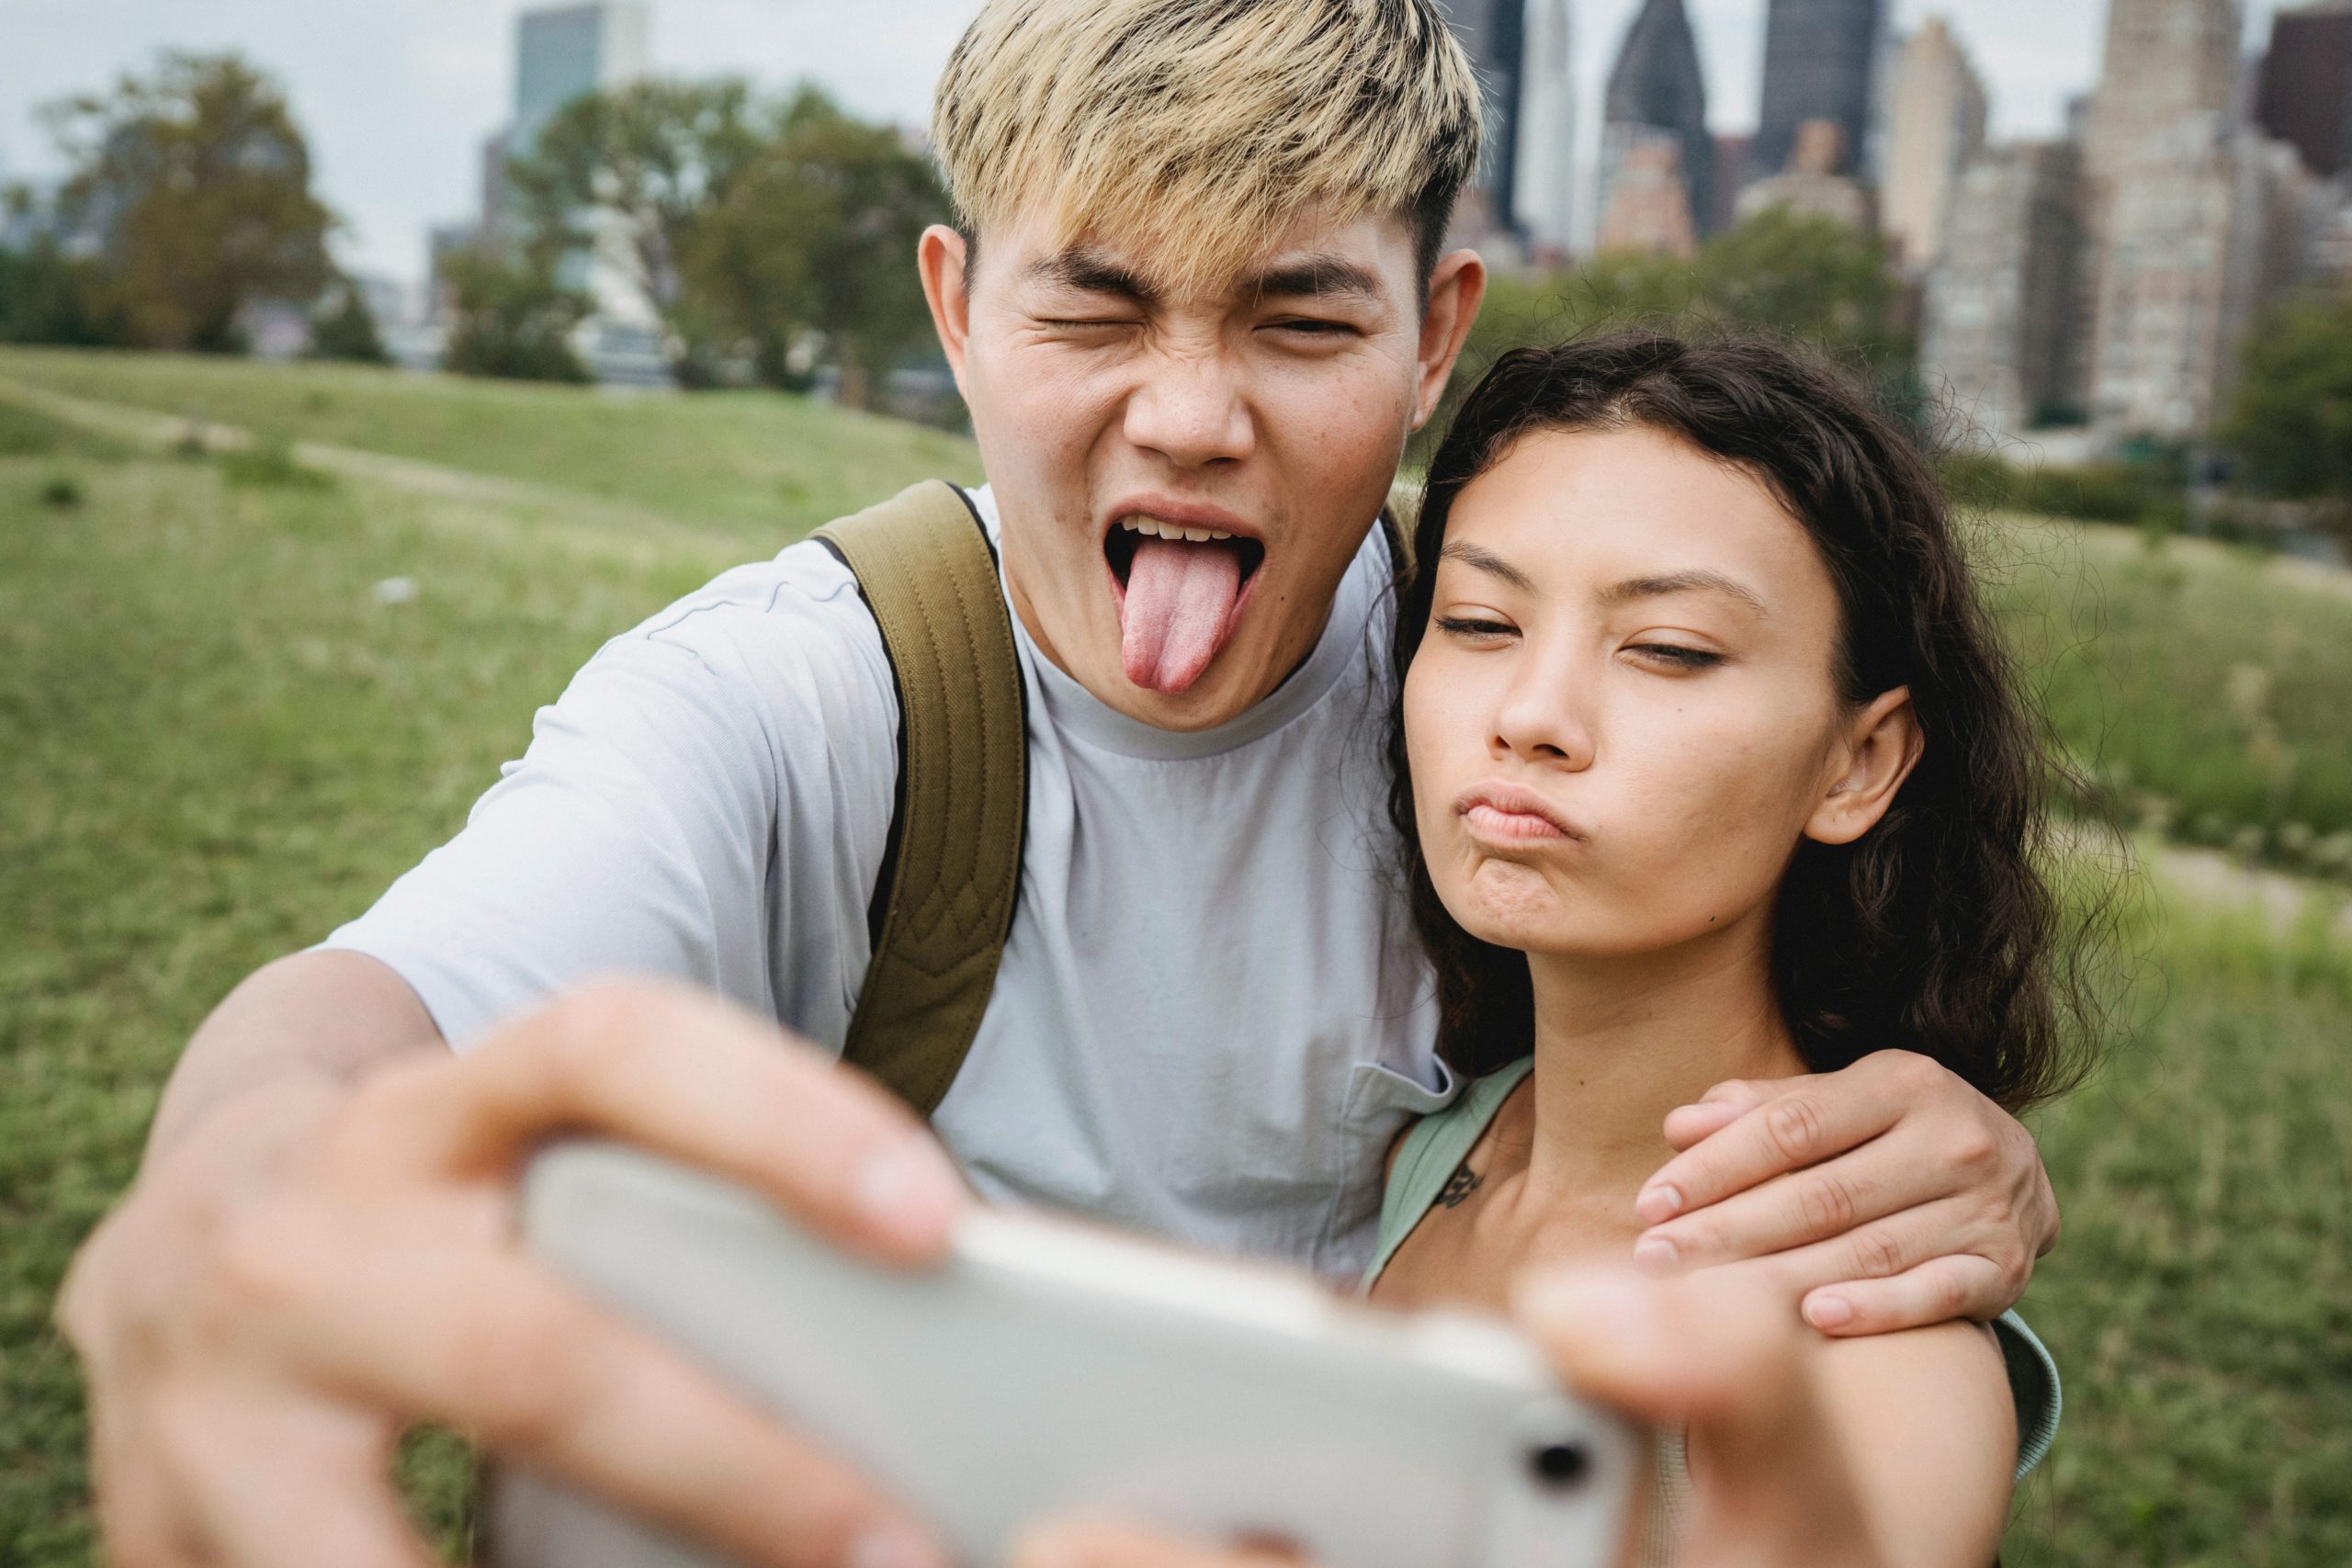 A couple taking a selfie outside, both making silly faces.